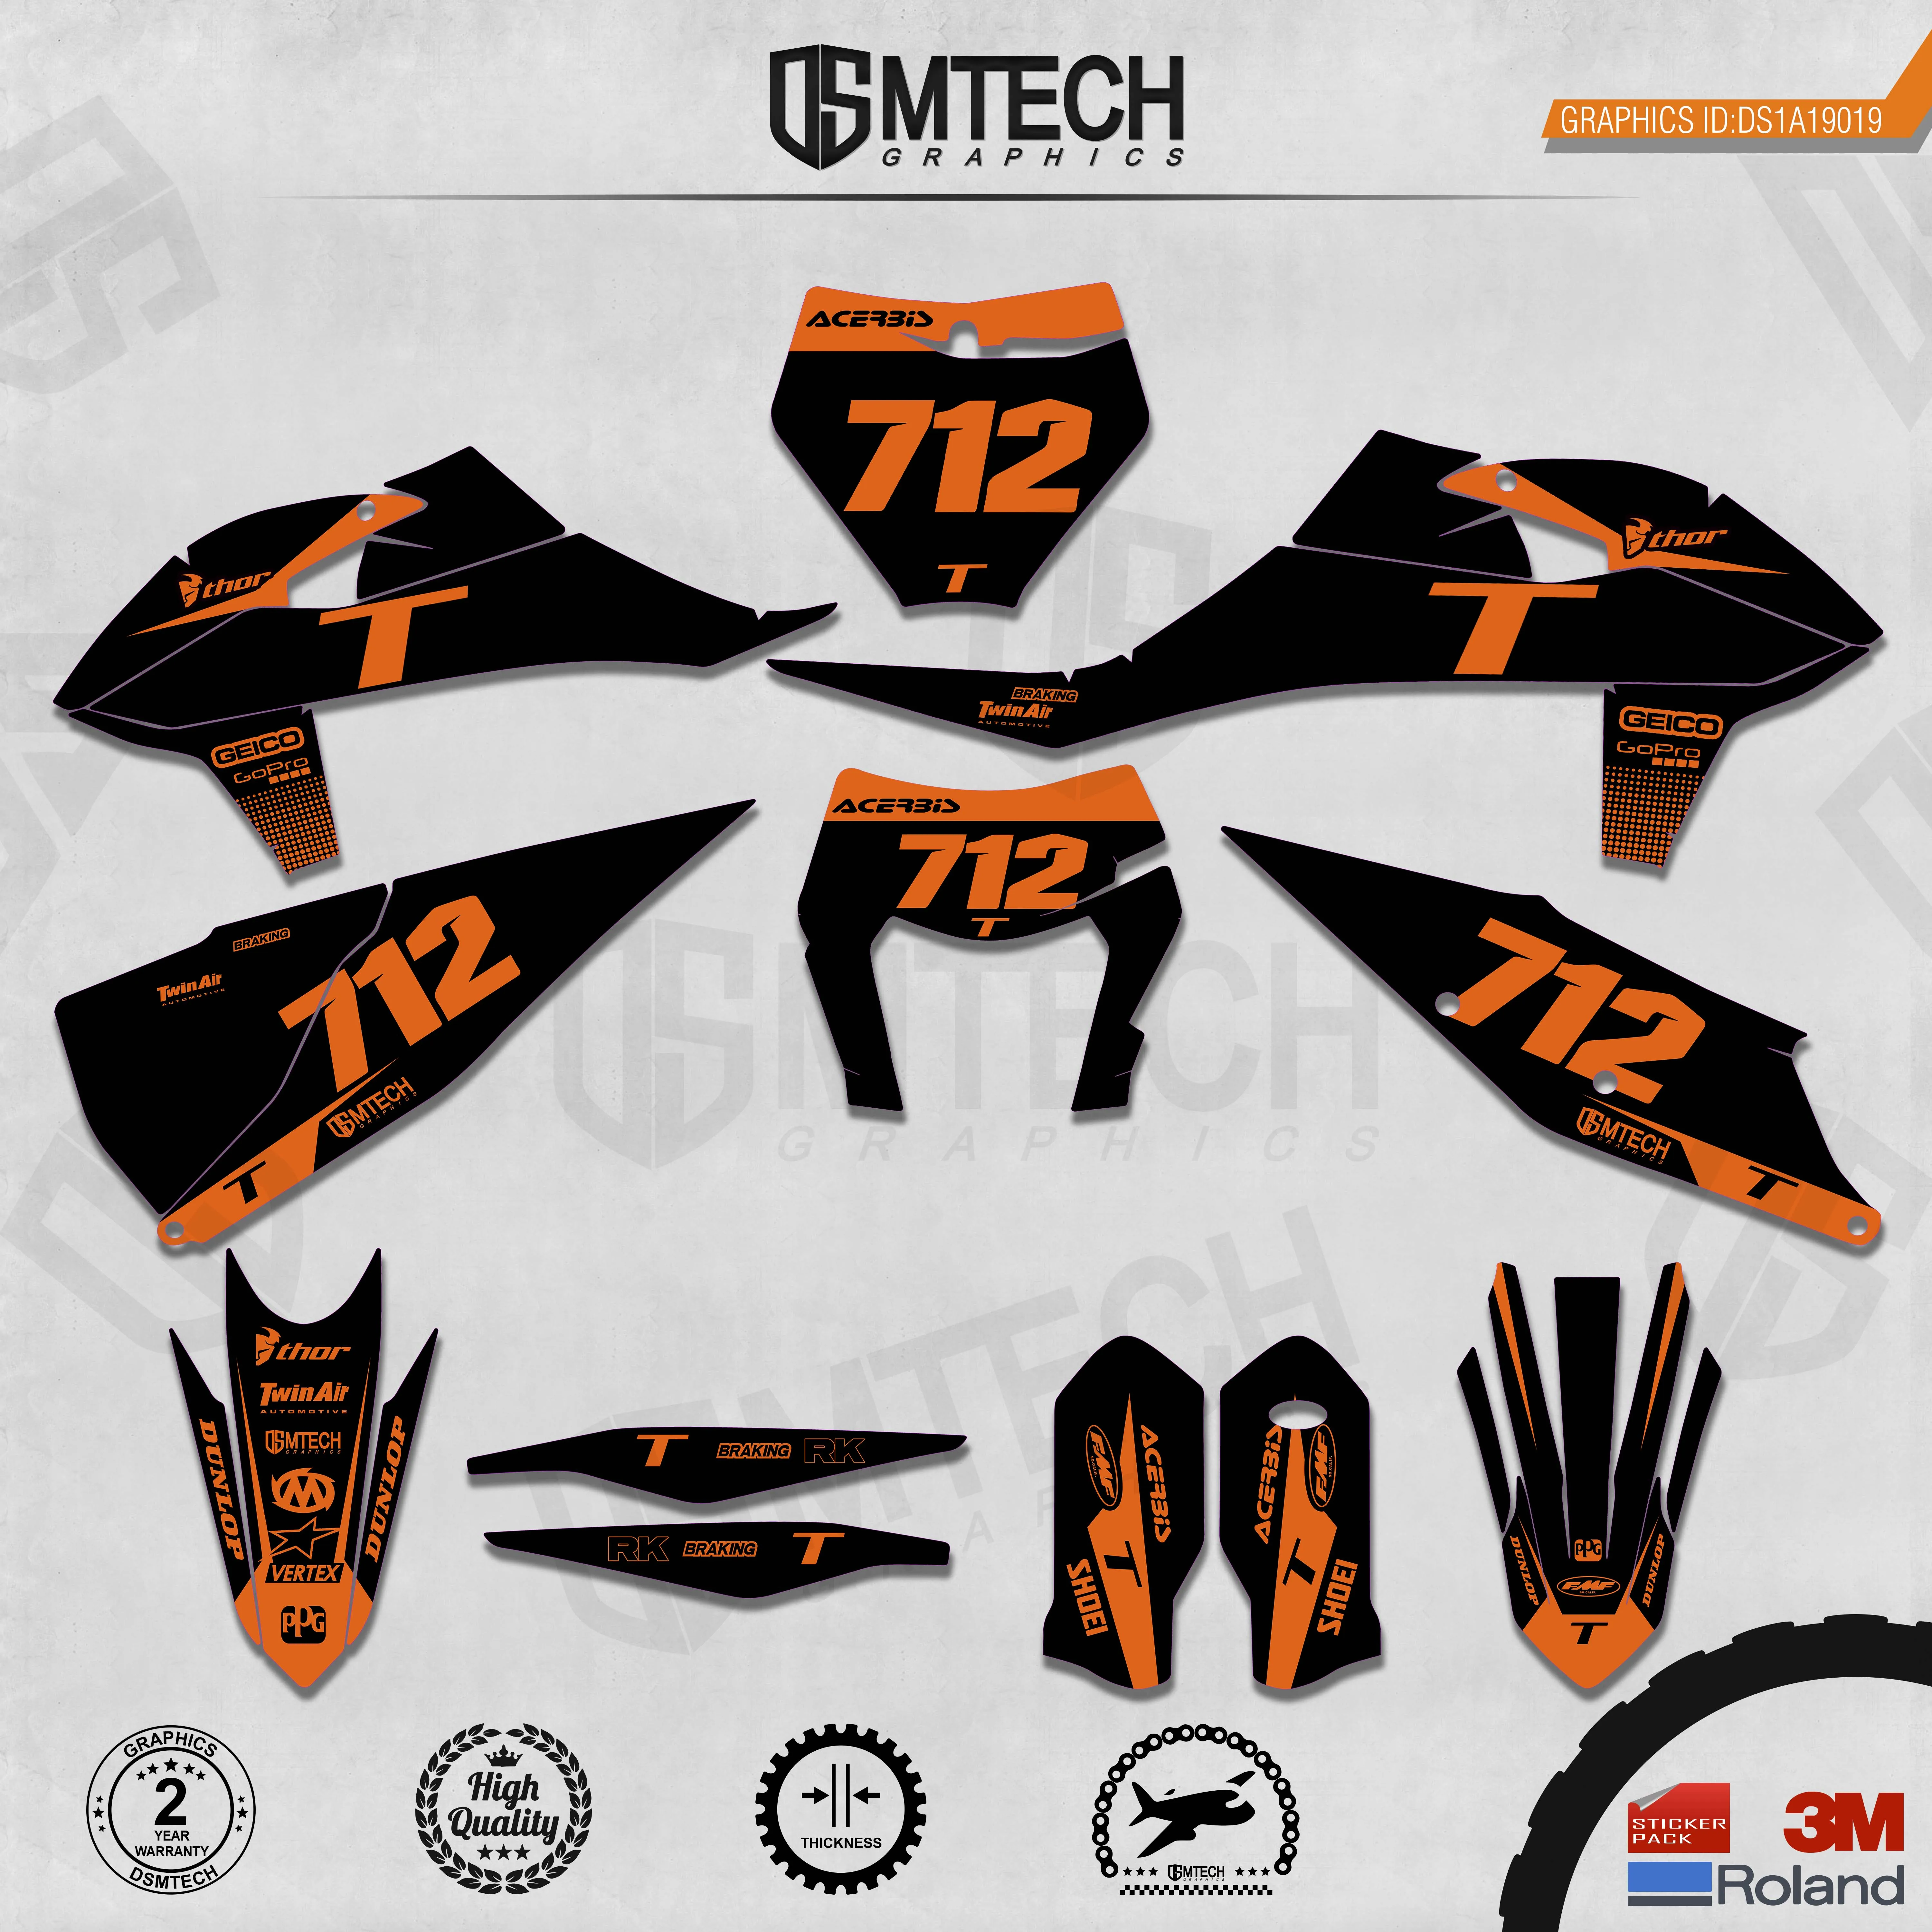 DSMTECH Customized Team Graphics Backgrounds Decals 3M Custom Stickers For 2019-2020 SXF 2020-2021EXC 019